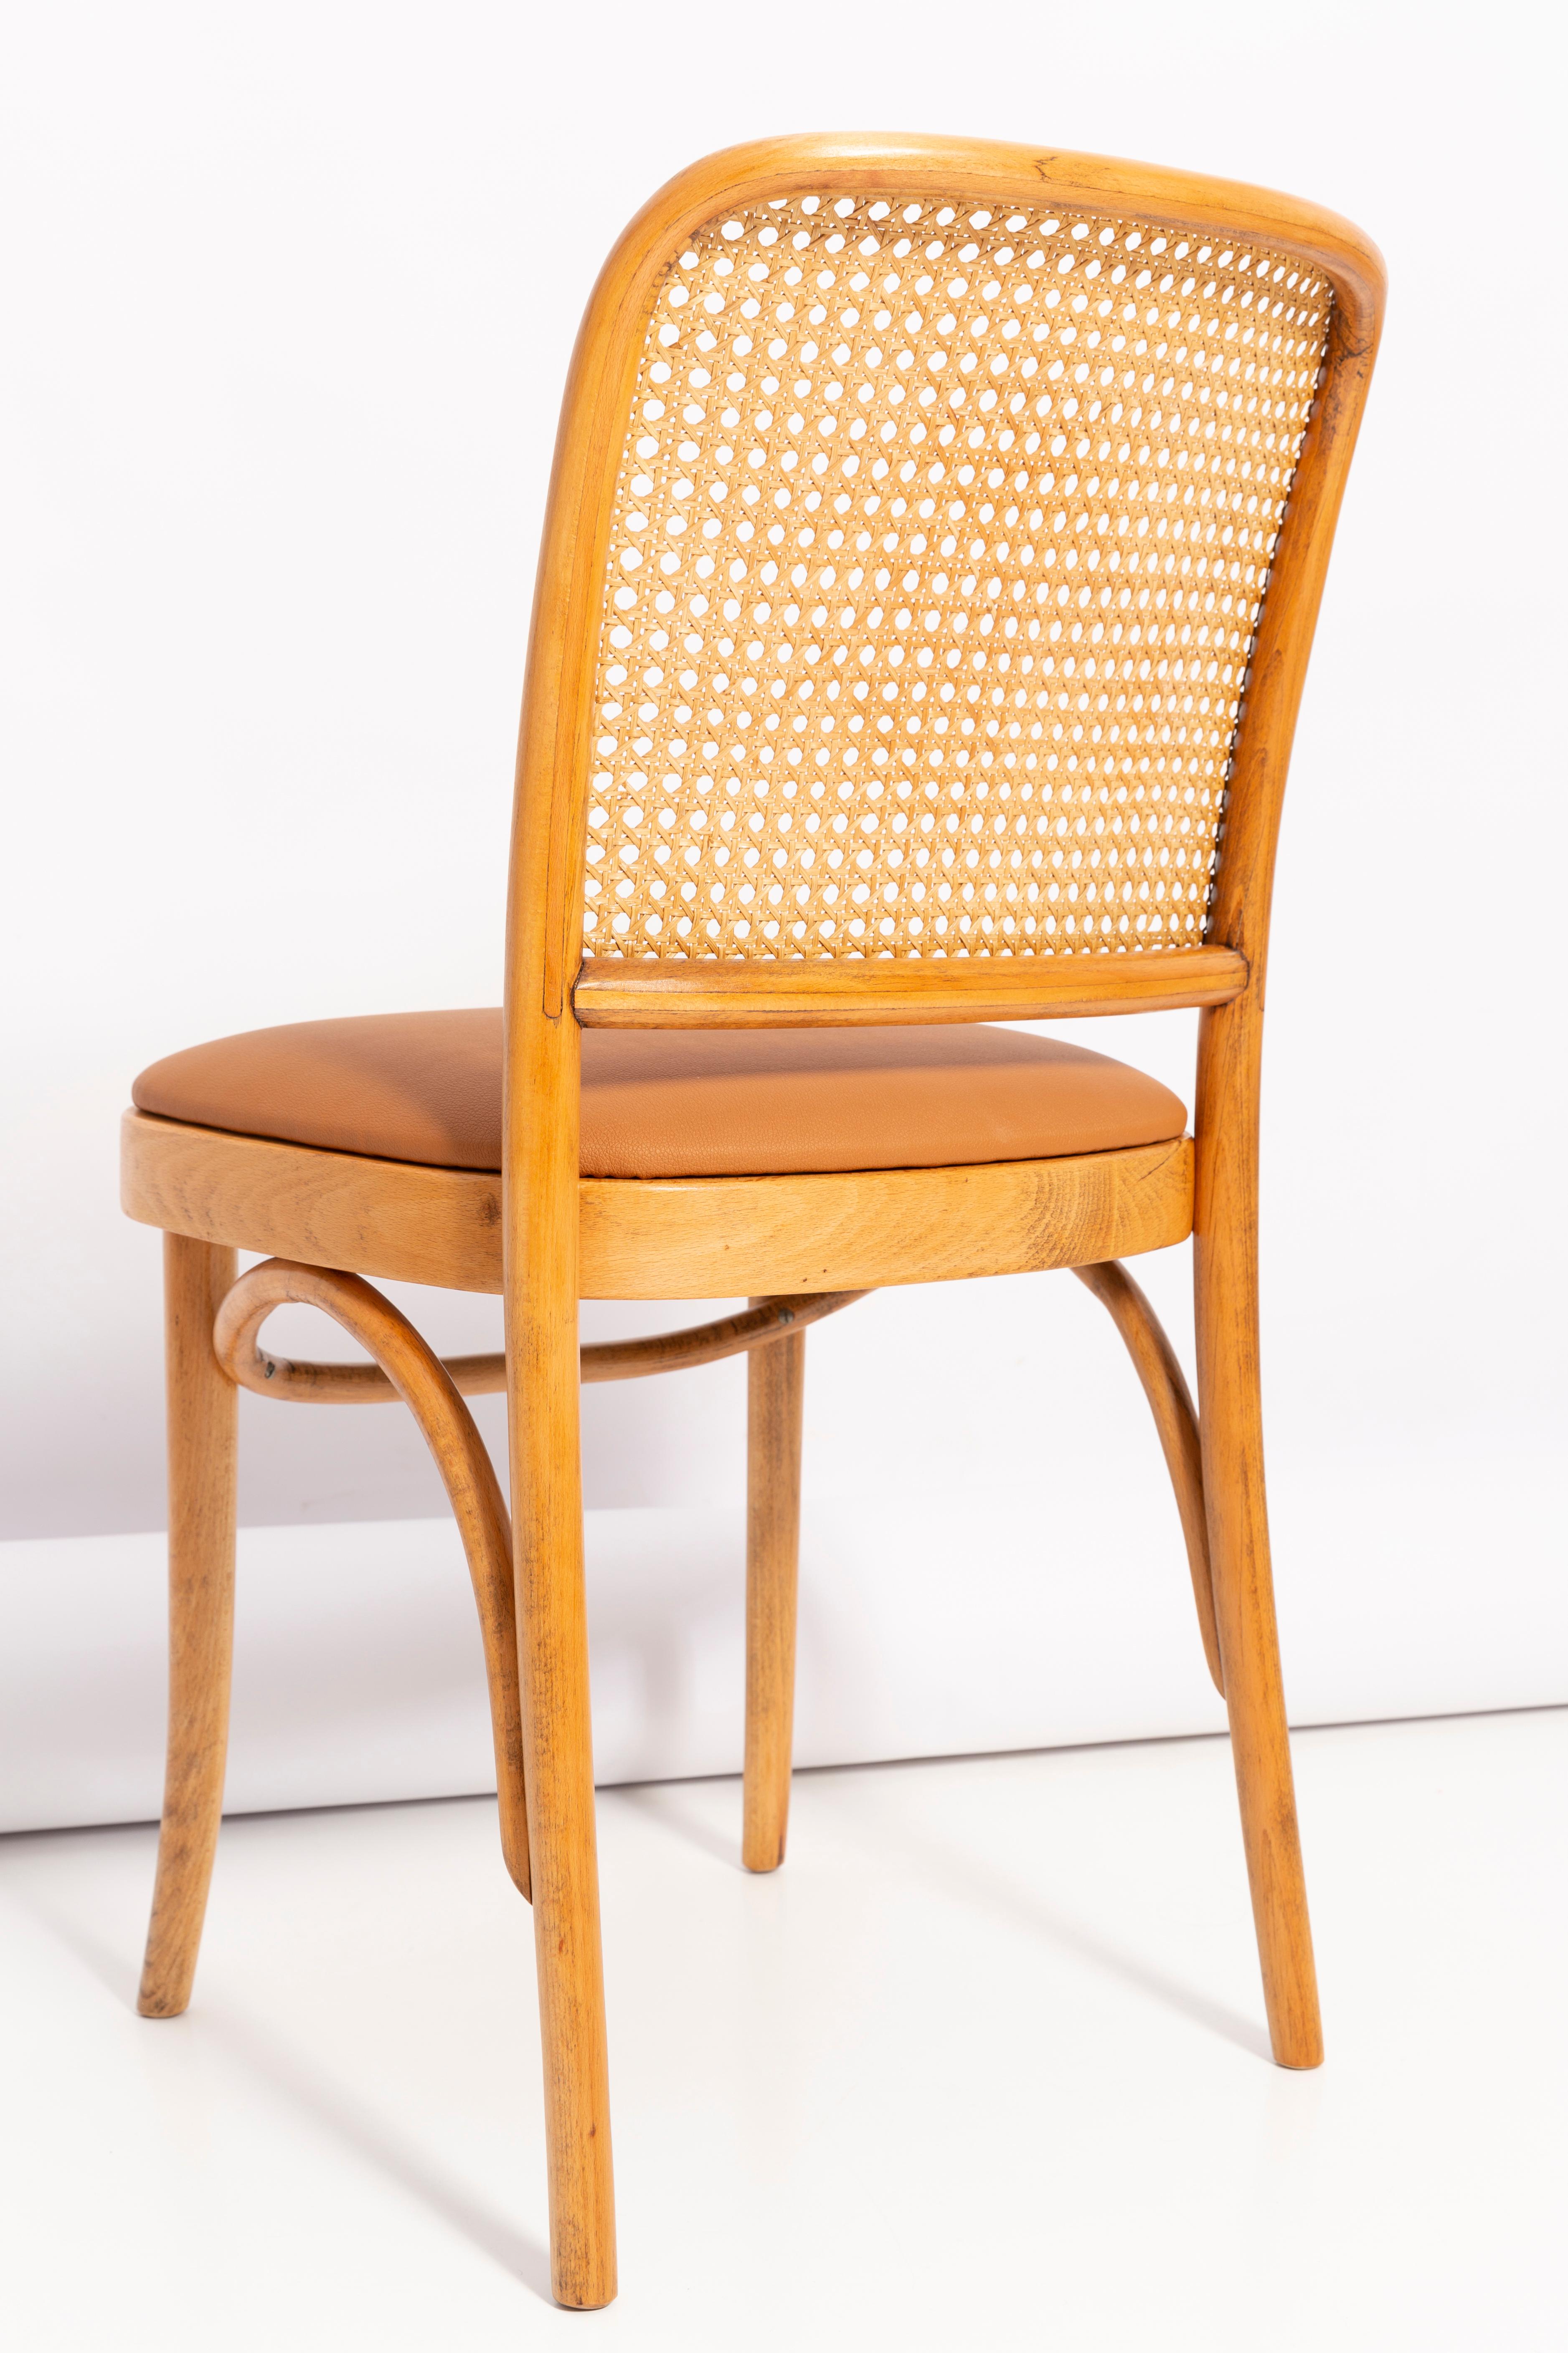 Set of Four Mid-Century Camel Faux Leather Thonet Wood Rattan Chairs, 1960s In Excellent Condition For Sale In 05-080 Hornowek, PL